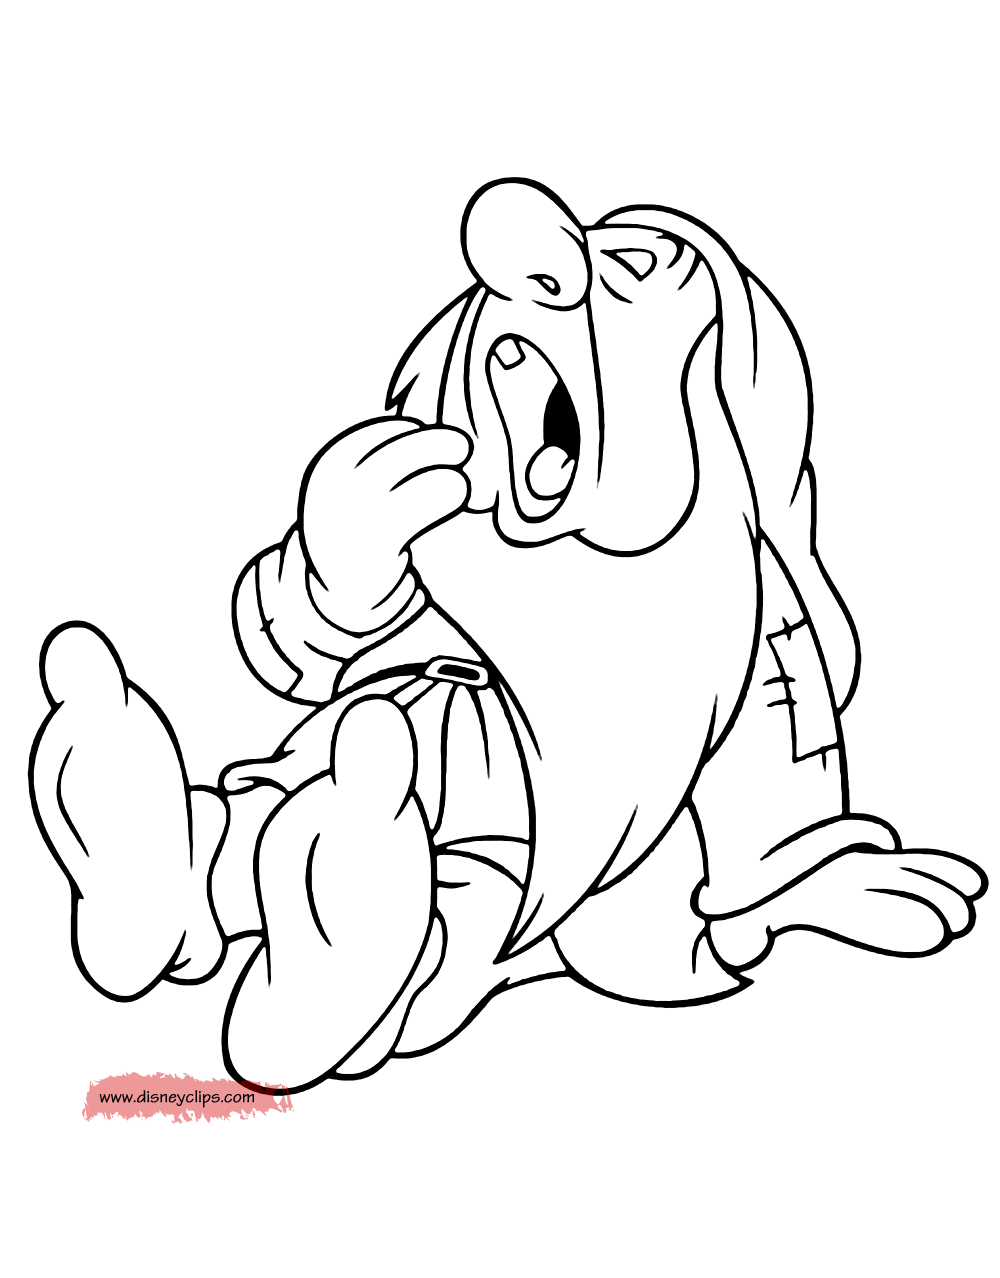 From The Seven Dwarfs Sleepy Pages Coloring Pages